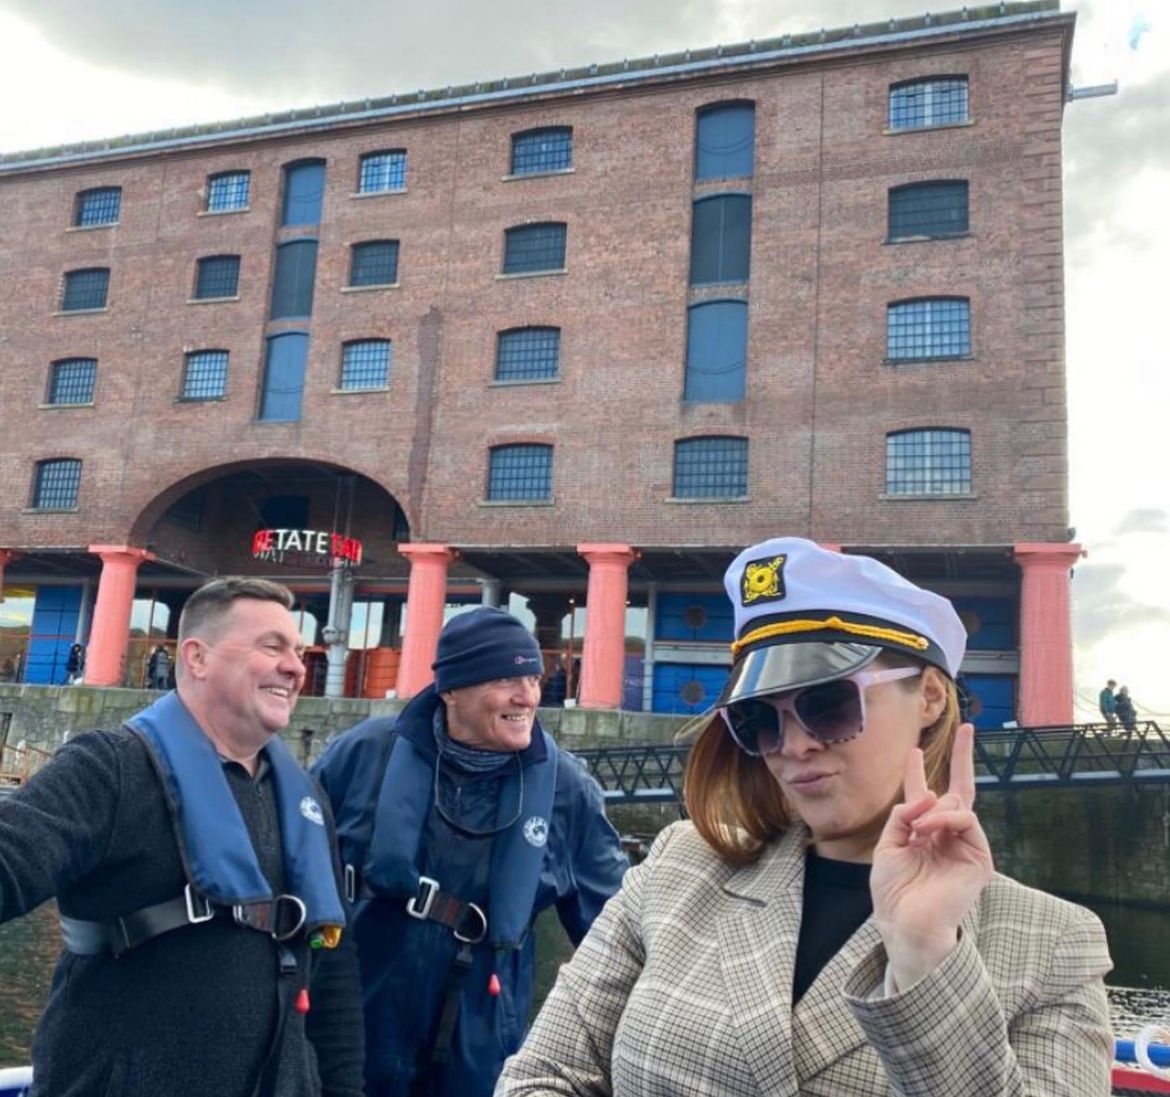 Have you got that #FridayFeeling ? We know we certainly do!✌️ We've got a busy weekend ahead, and there's no better feeling. If you're heading down to @theAlbertDock or popping in to see our friends at @tateliverpool this weekend be sure to give us a wave as we sail by!👋